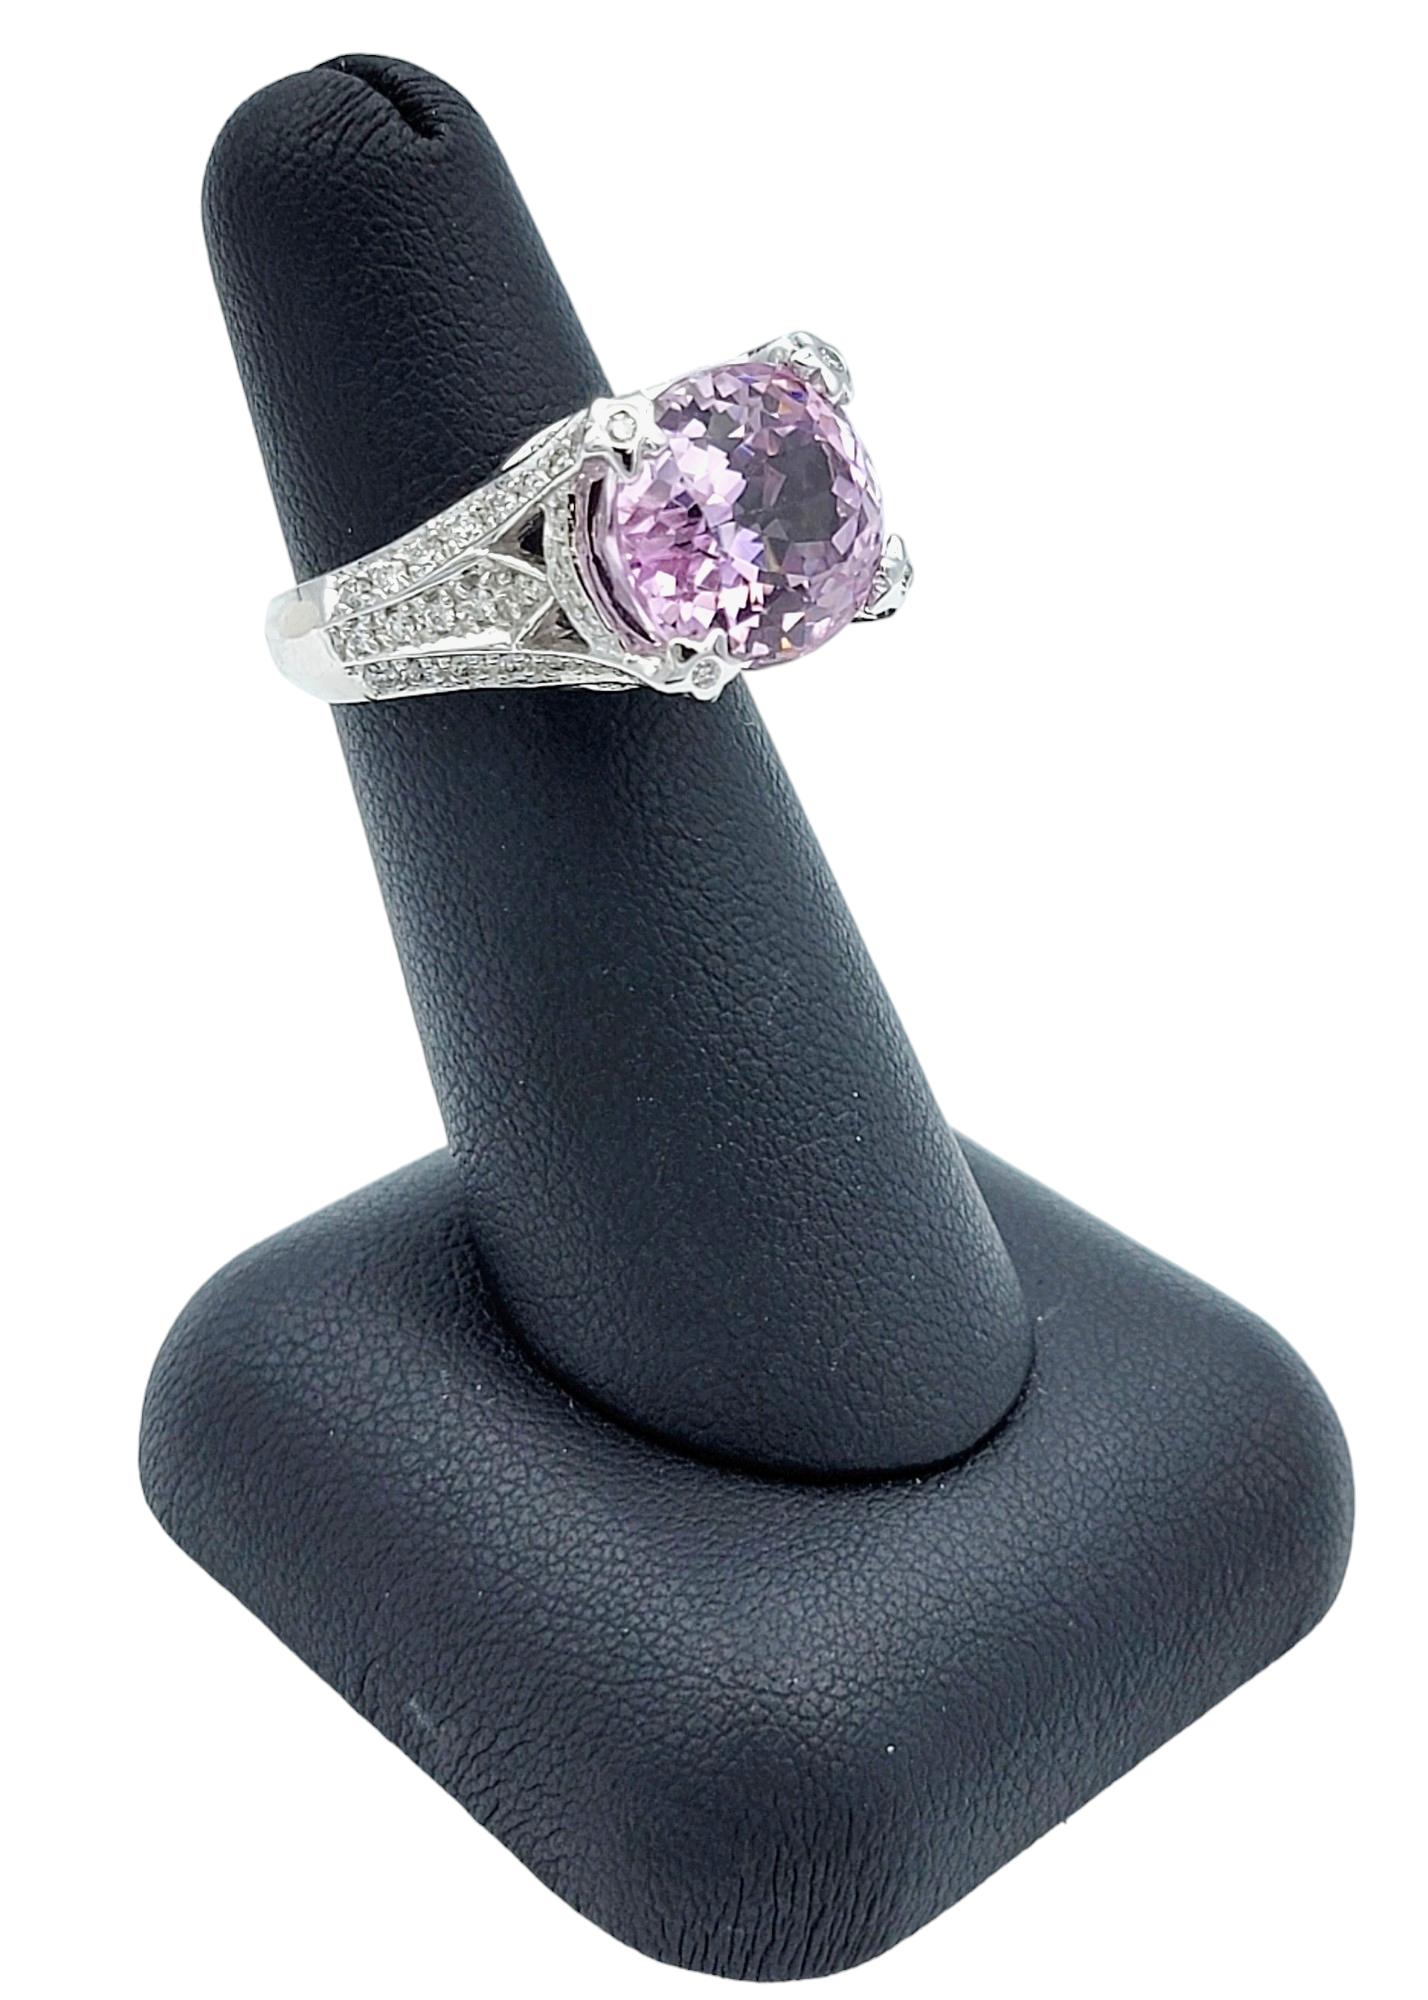 Sonia B. Oval Cut Pink Kunzite Ring with Pave Diamonds in 14 Karat White Gold For Sale 5